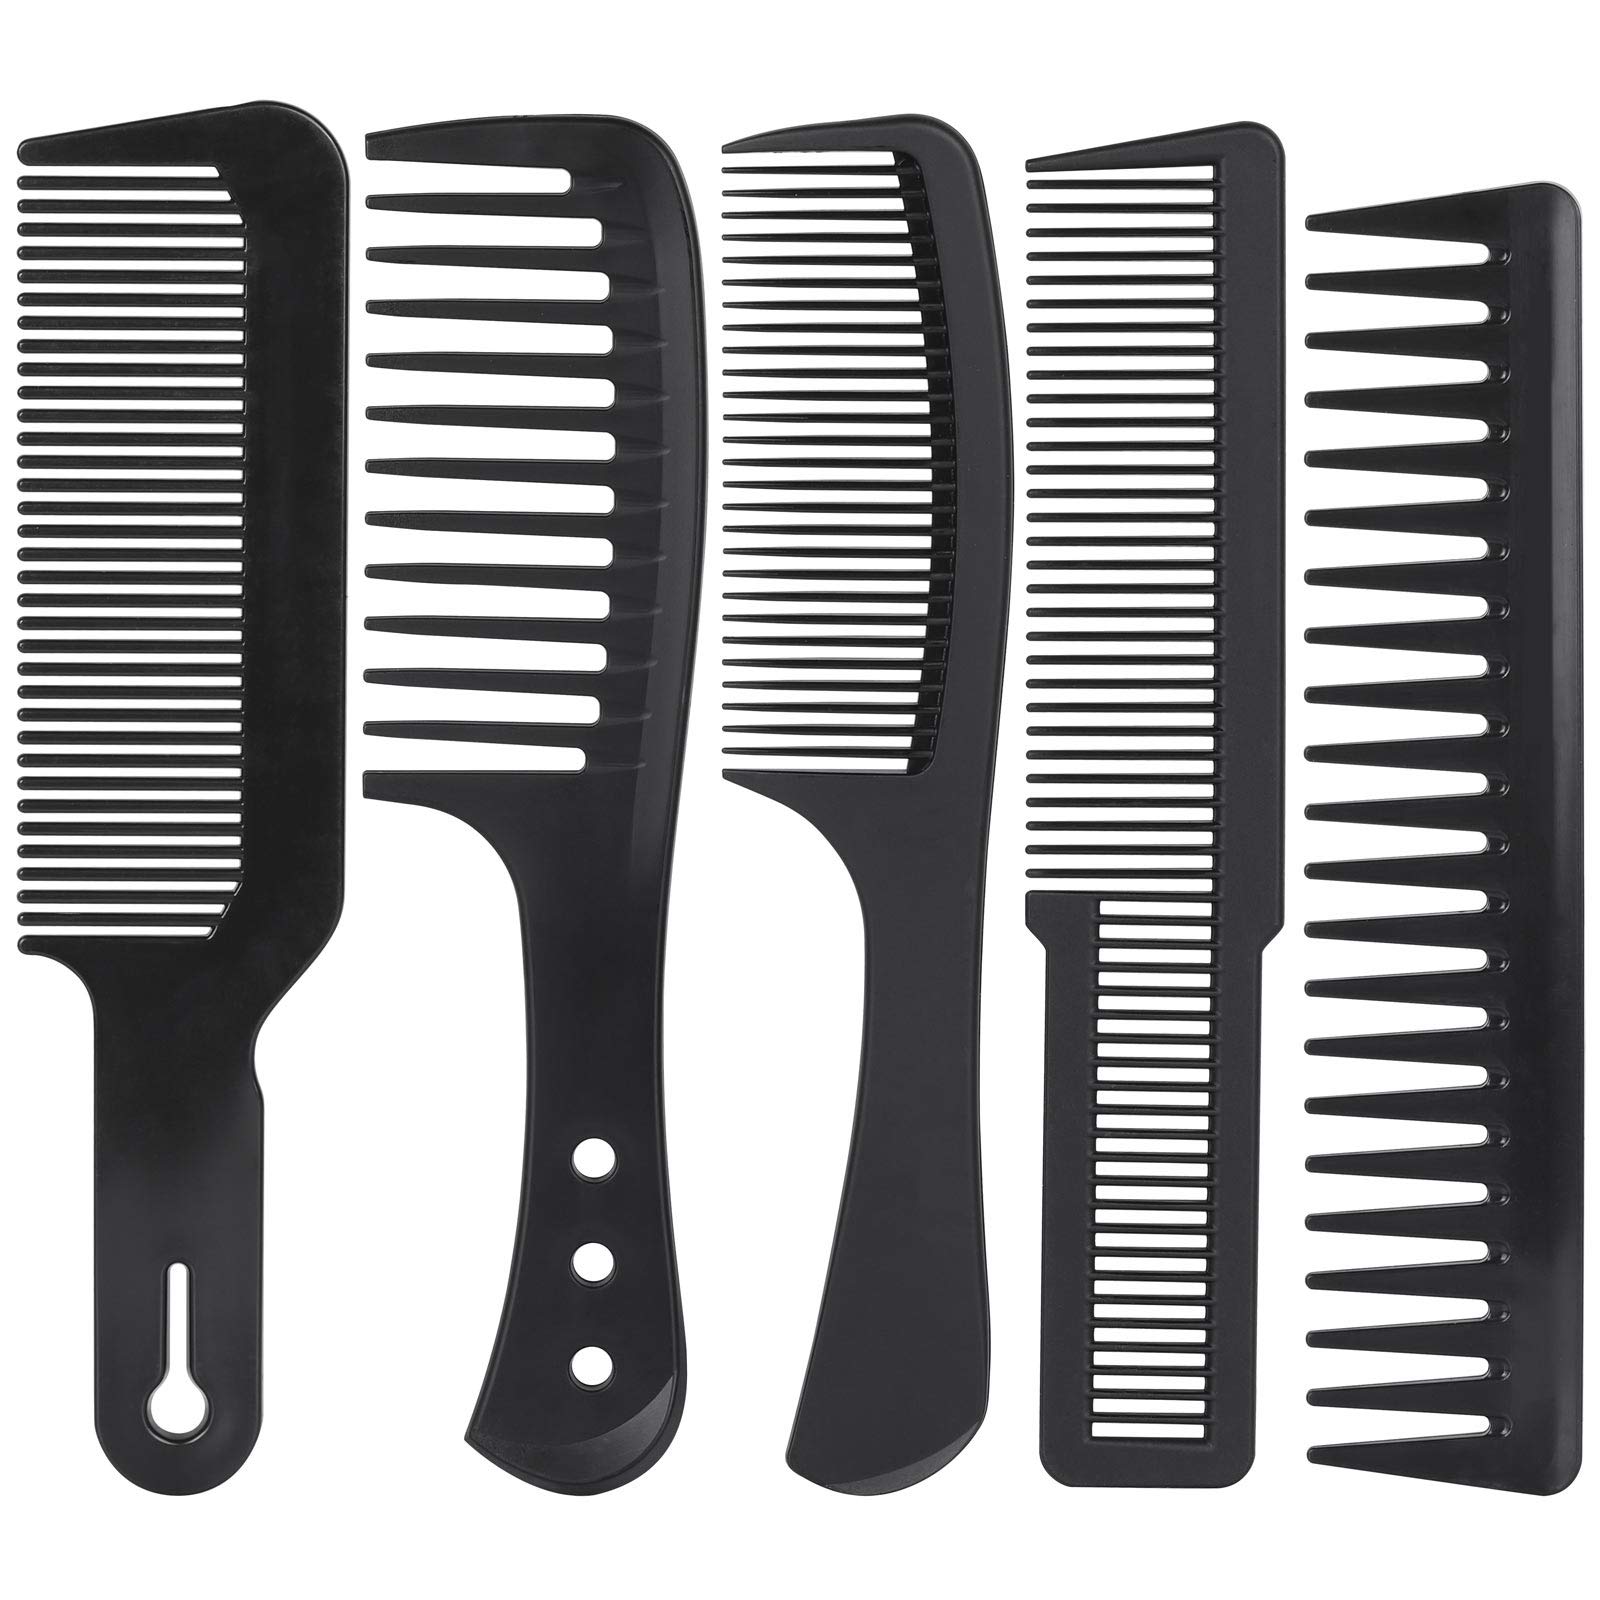 5 Pcs Wide Tooth Hair Combs - Fiber Carbon Combs Detangling Comb Styling Paddle Comb for Men Women Wet Curly/Thick Hair